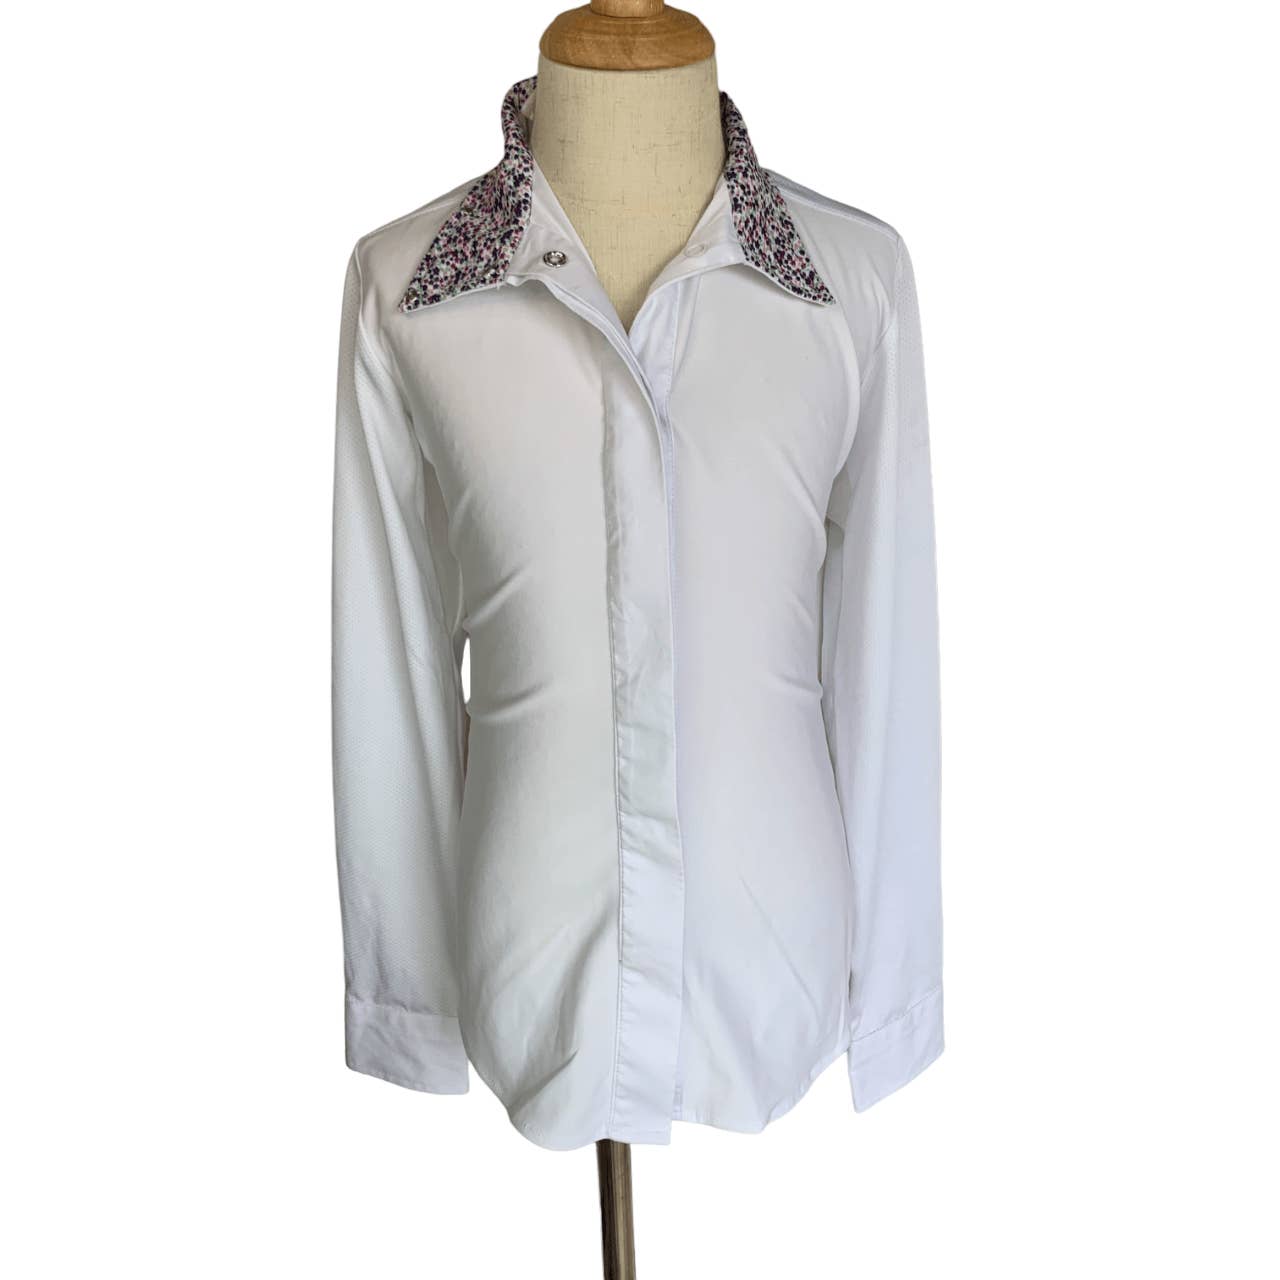 Ovation 'Ellie' Show Shirt in White / Purple Flowers - Youth 10